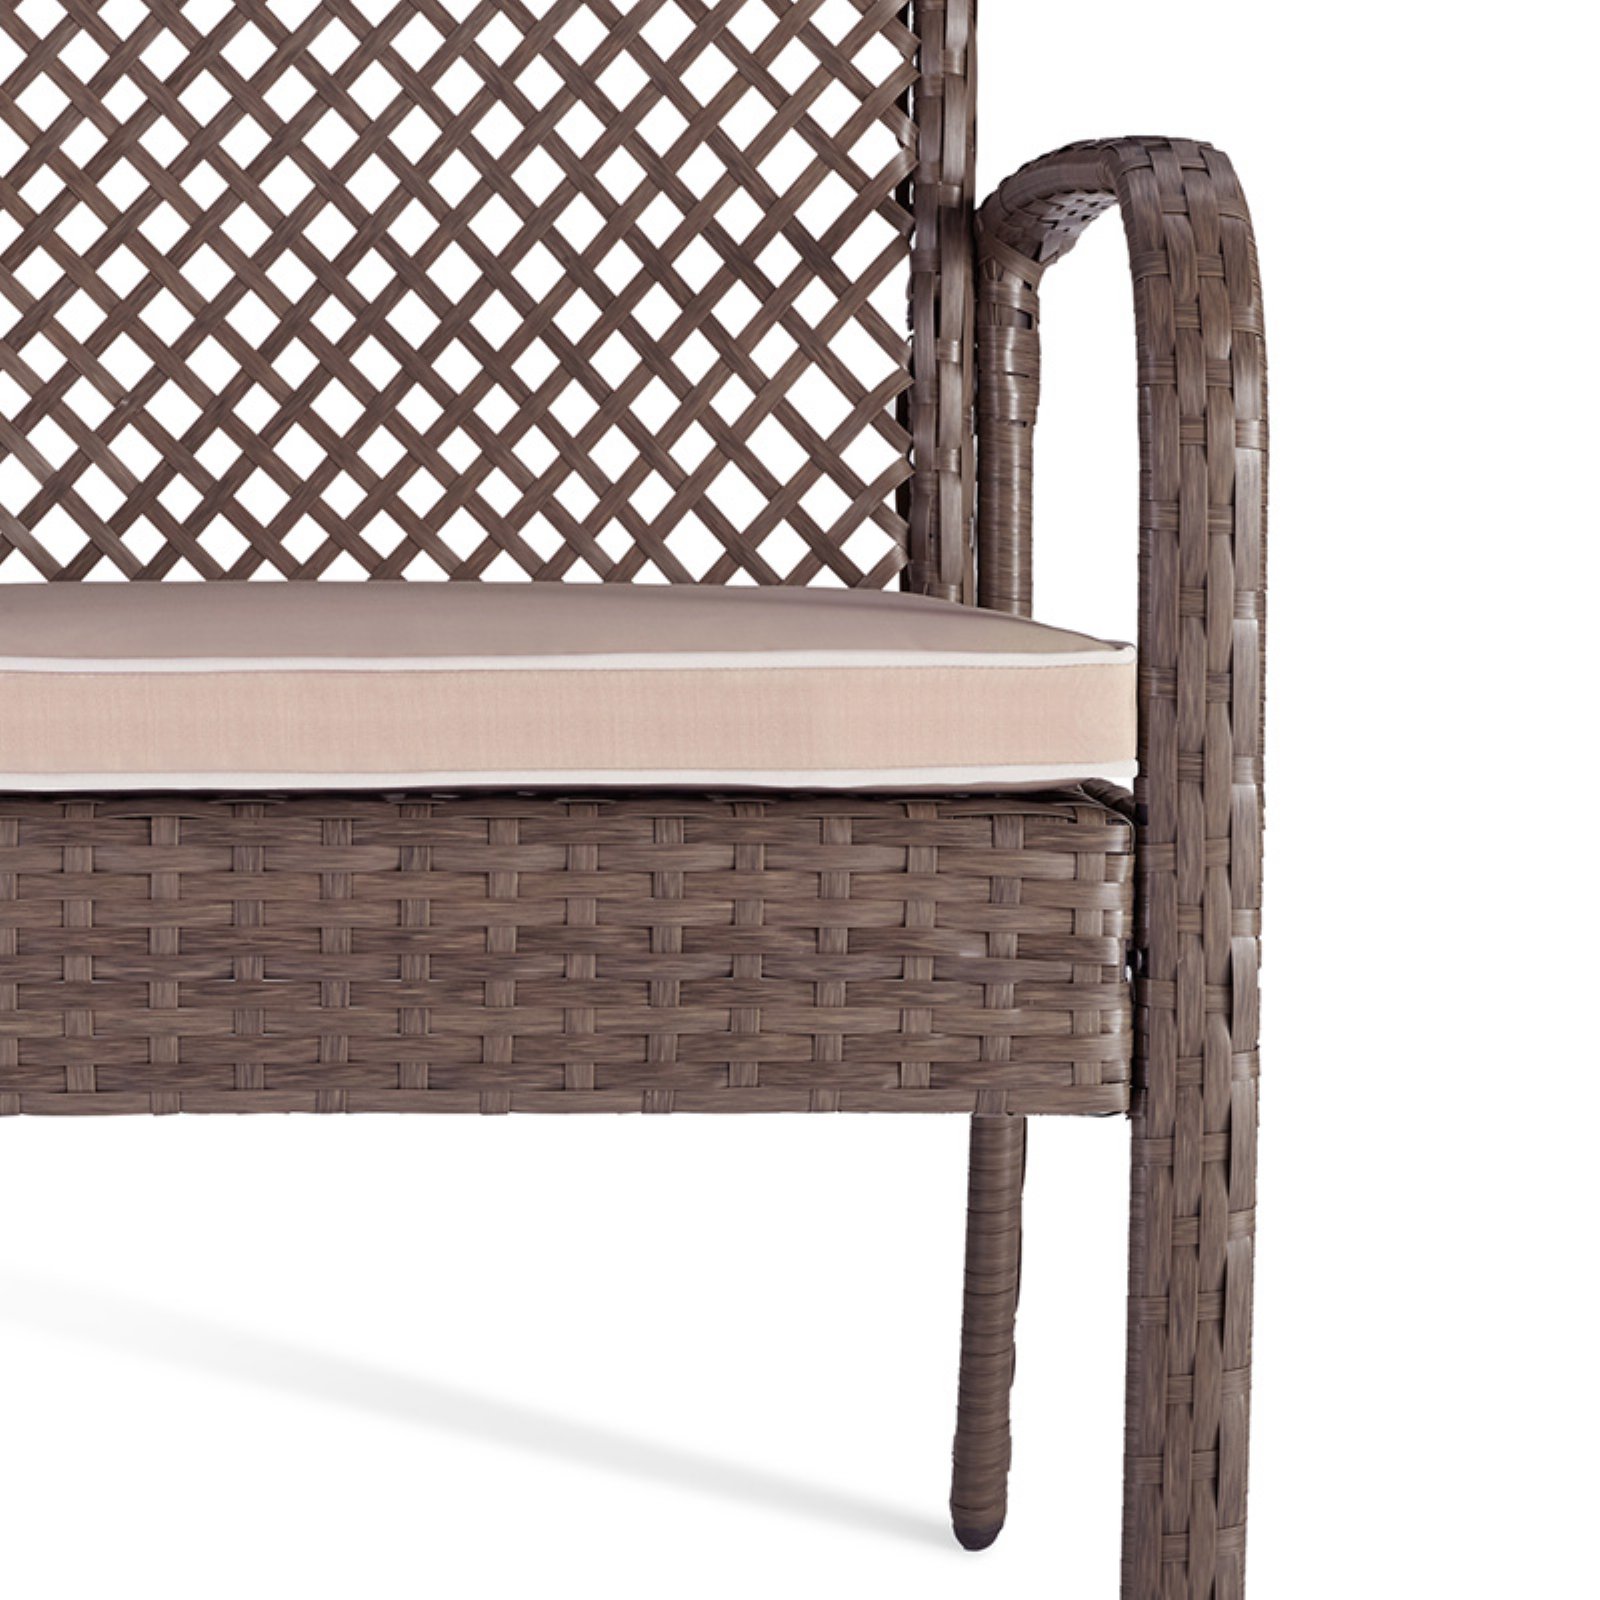 Crosley Furniture Tribeca Wicker Patio Dining Arm Chair in Driftwood - image 5 of 6